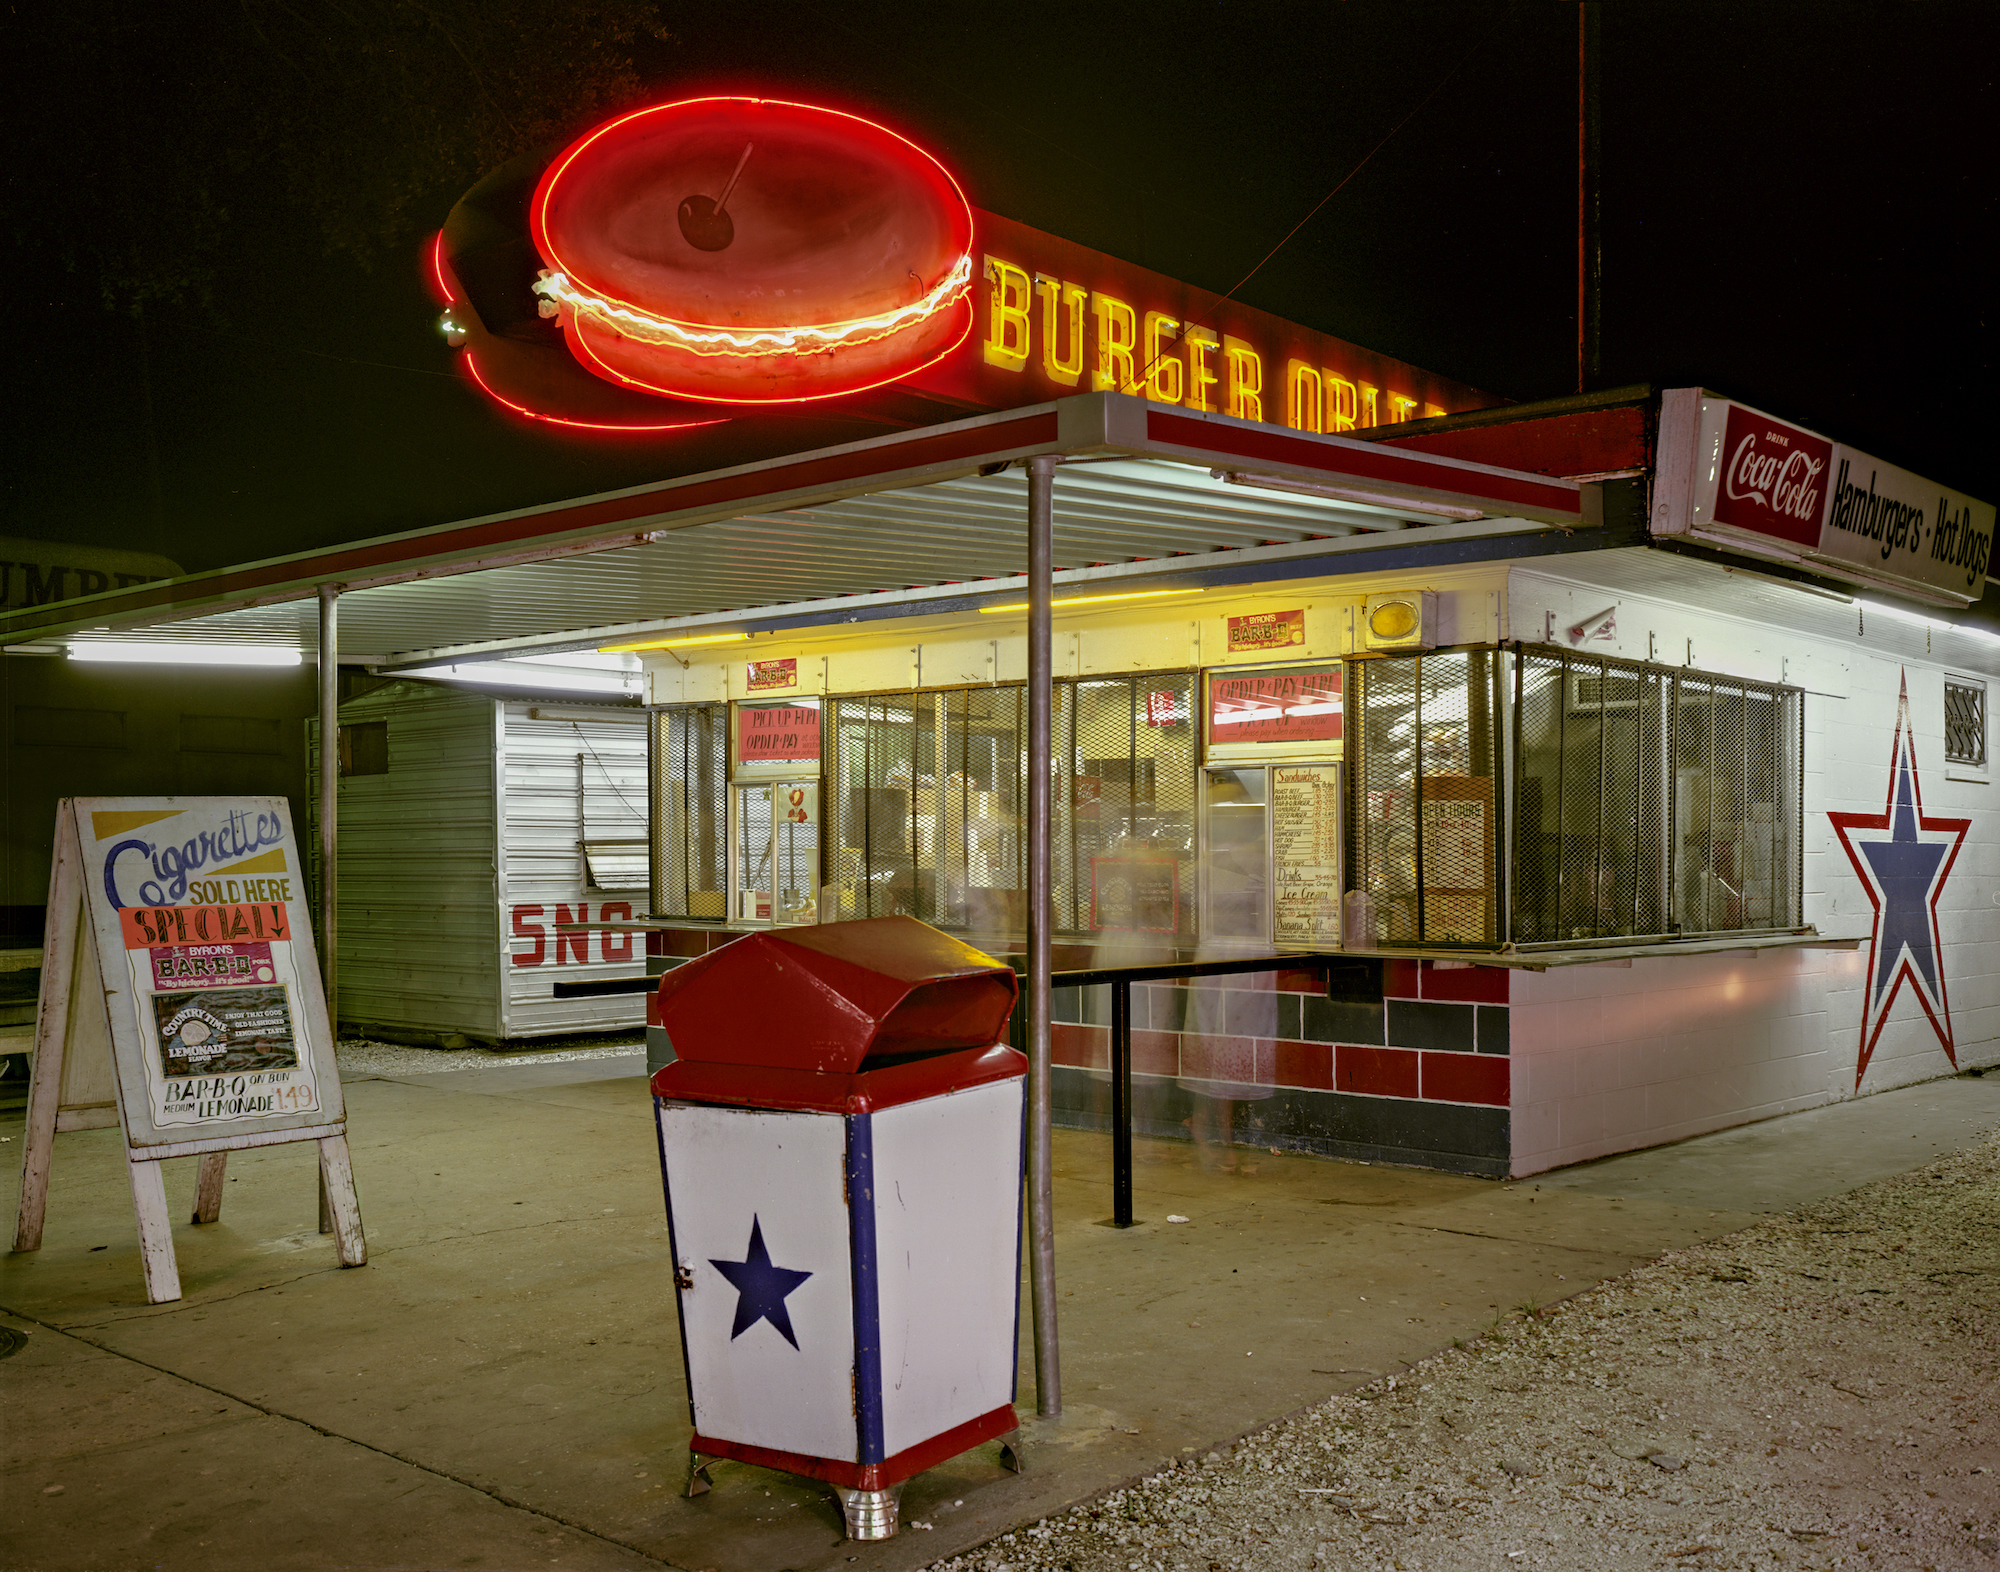 Jim Dow, Burger Orleans Drive-In at Night. LA 46, New Orleans, Louisiana, 1980. Courtesy the artist